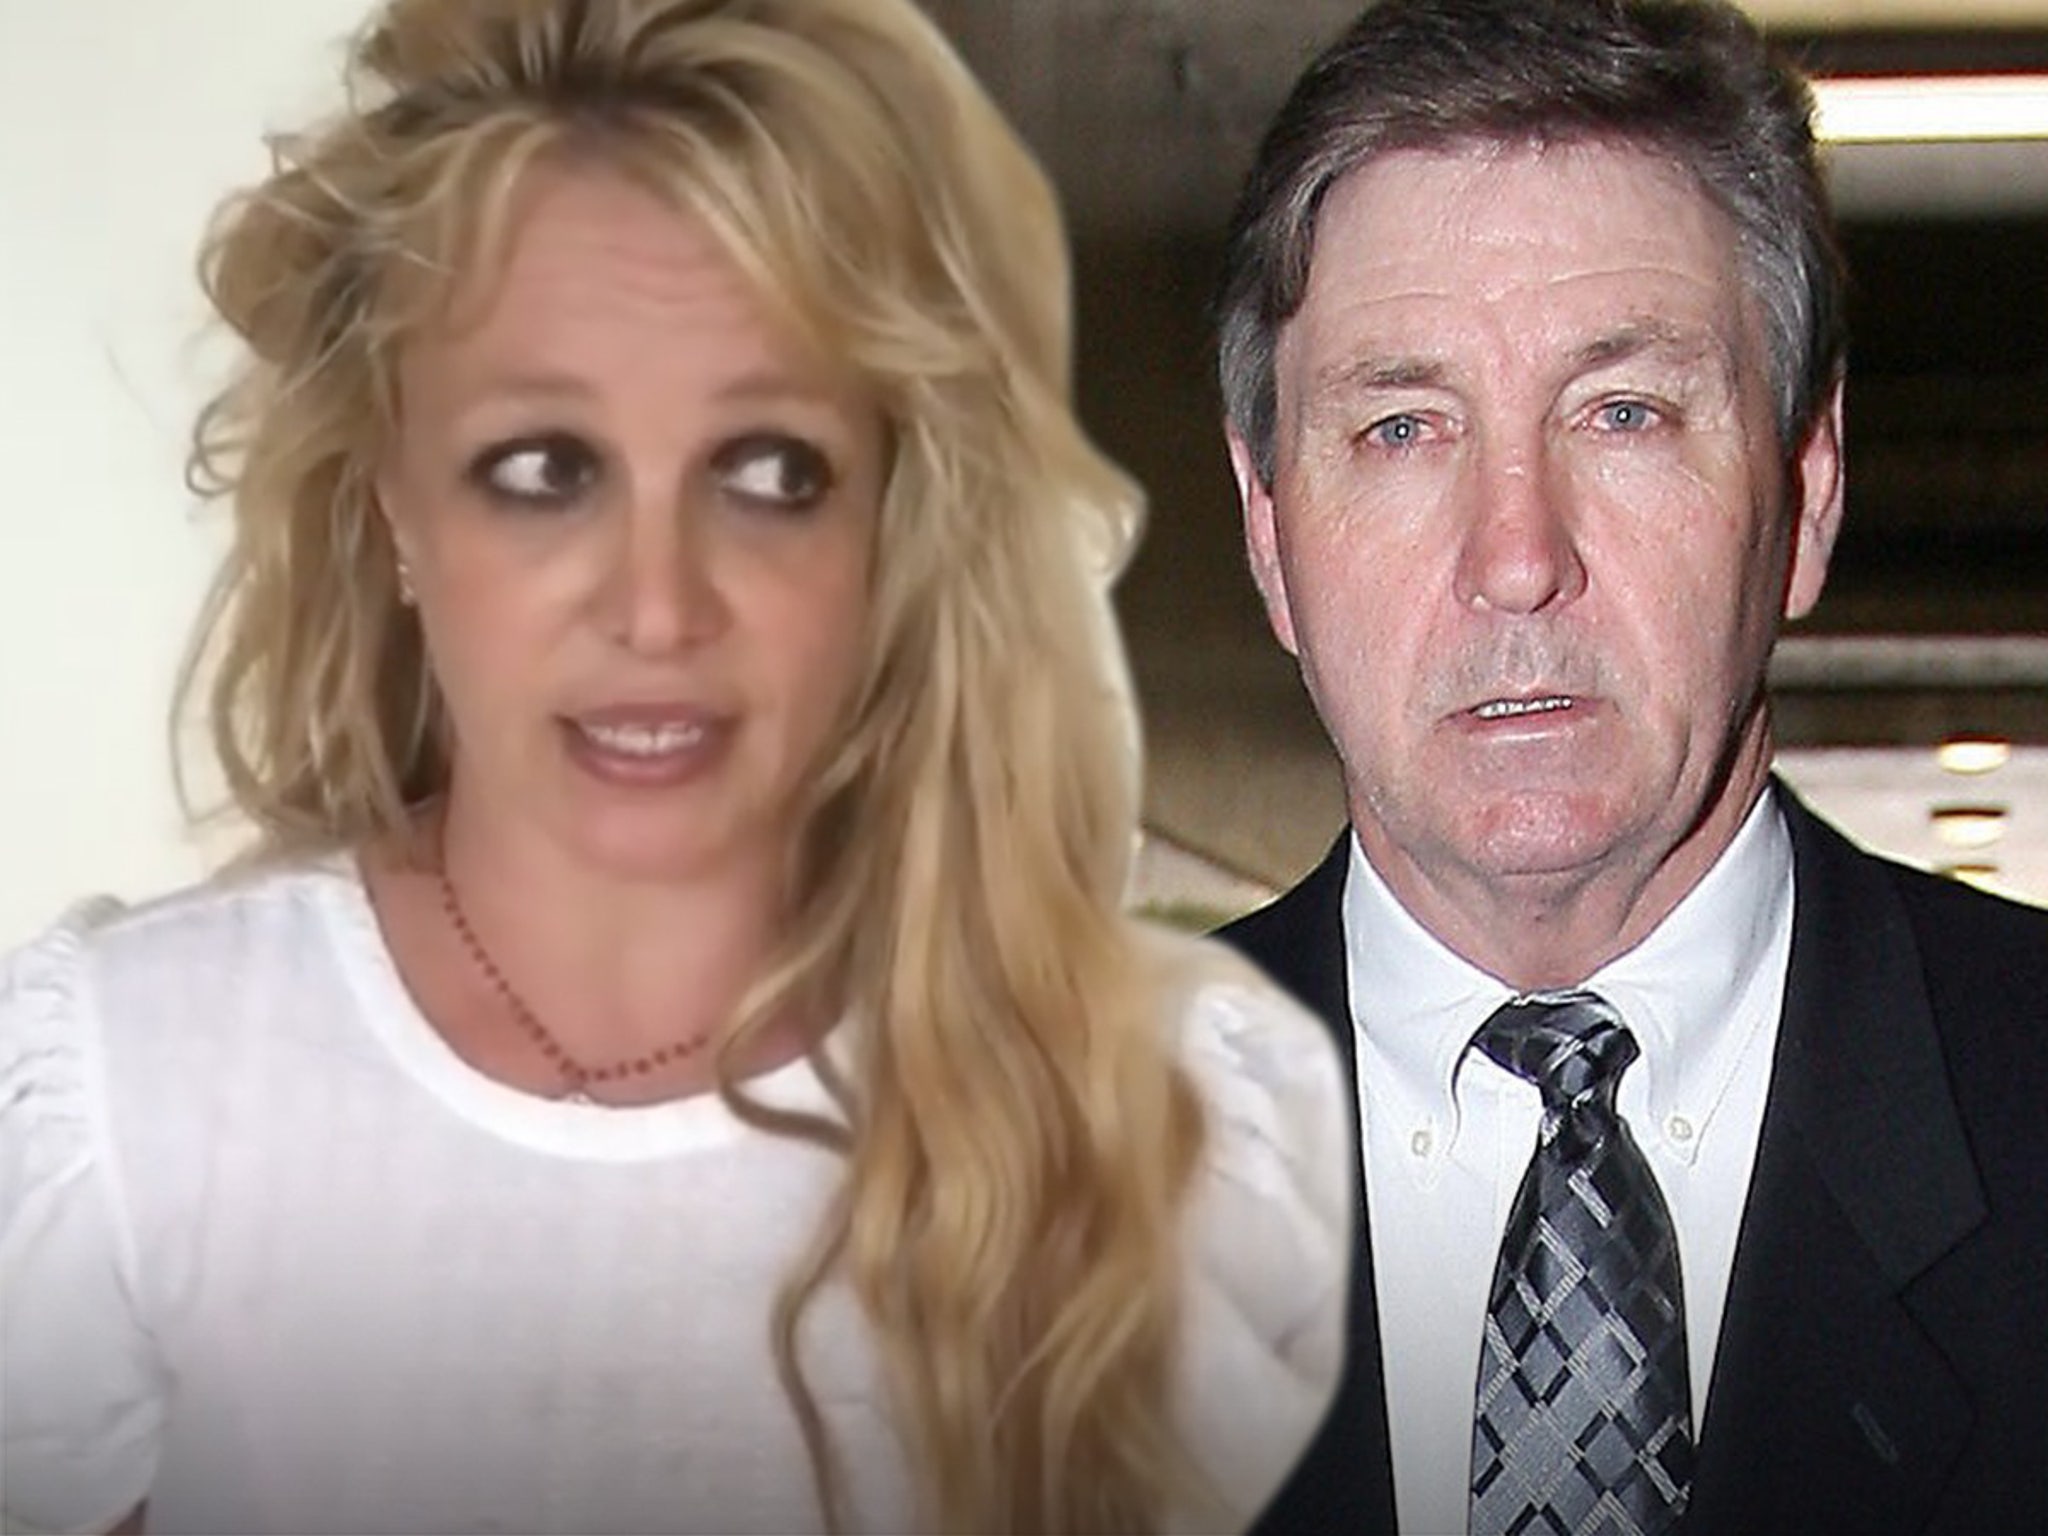 Double Fisting Britney Spears - Britney Spears' Dad Fires Back at 'Questionable' Conservatorship Claims